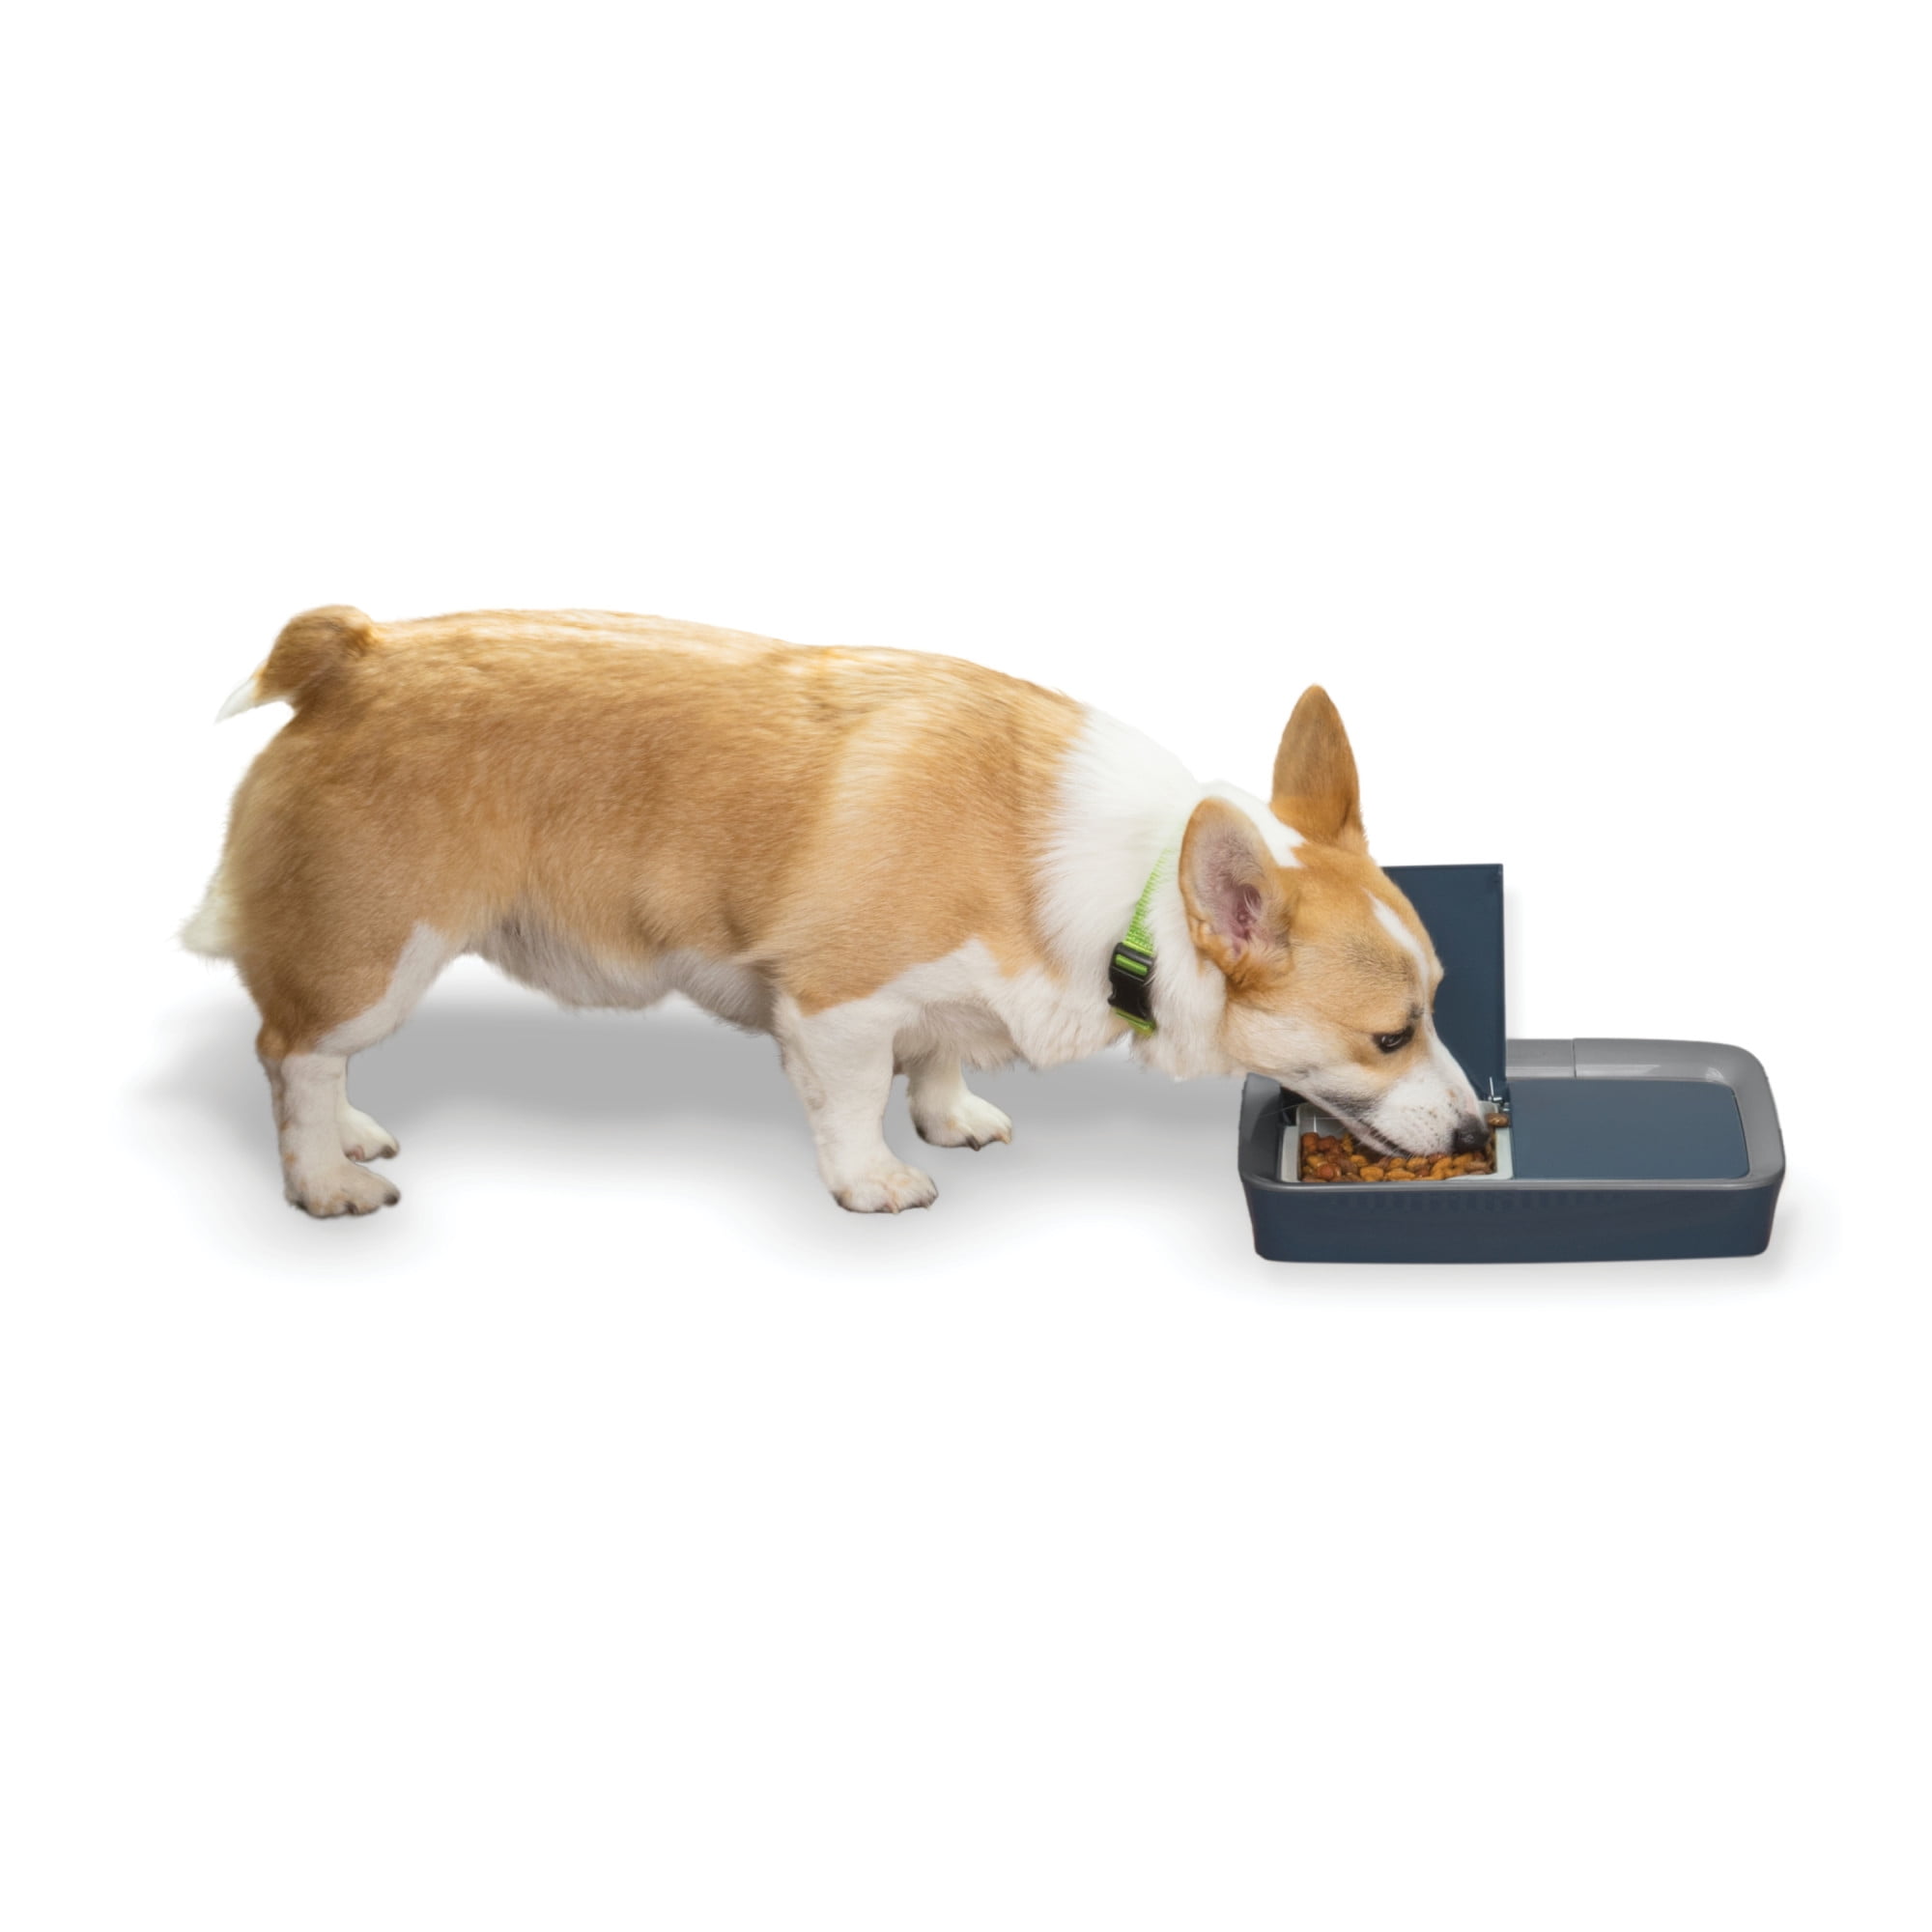 Honeywell 2-in-1 Smart Pet Bowl with Slow Feeder Insert and